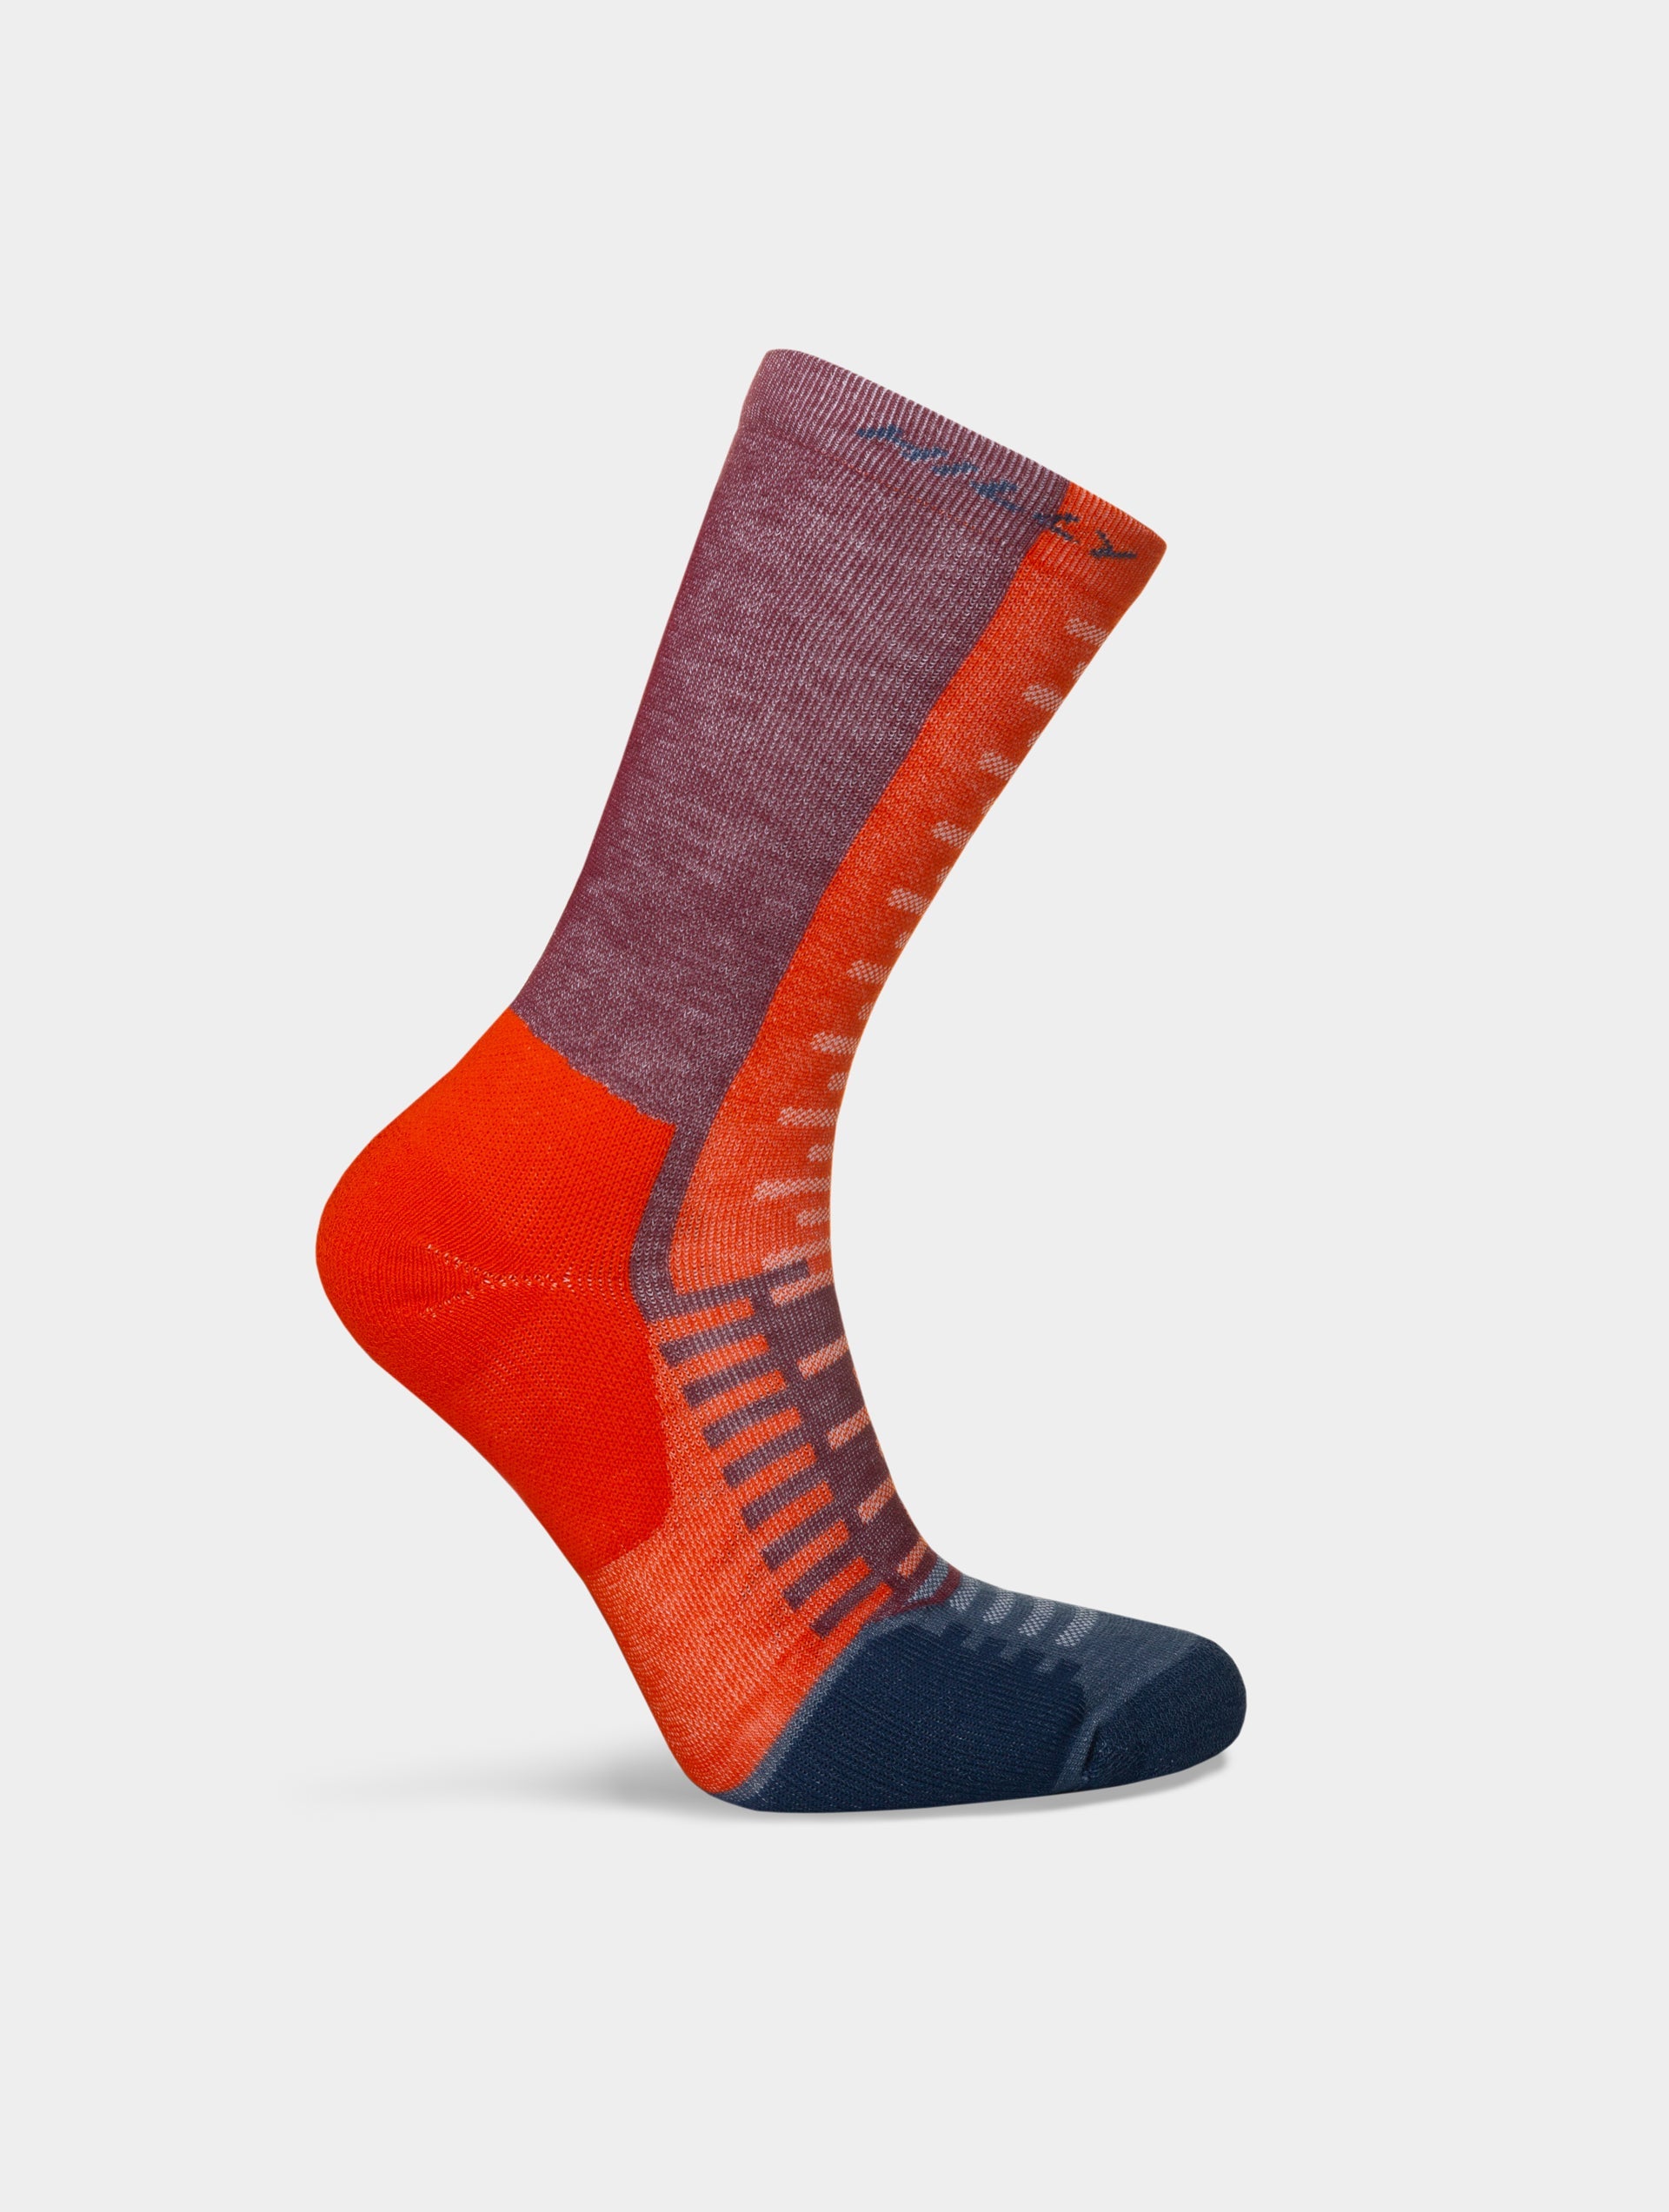 Hilly Active Running Socks - Crew